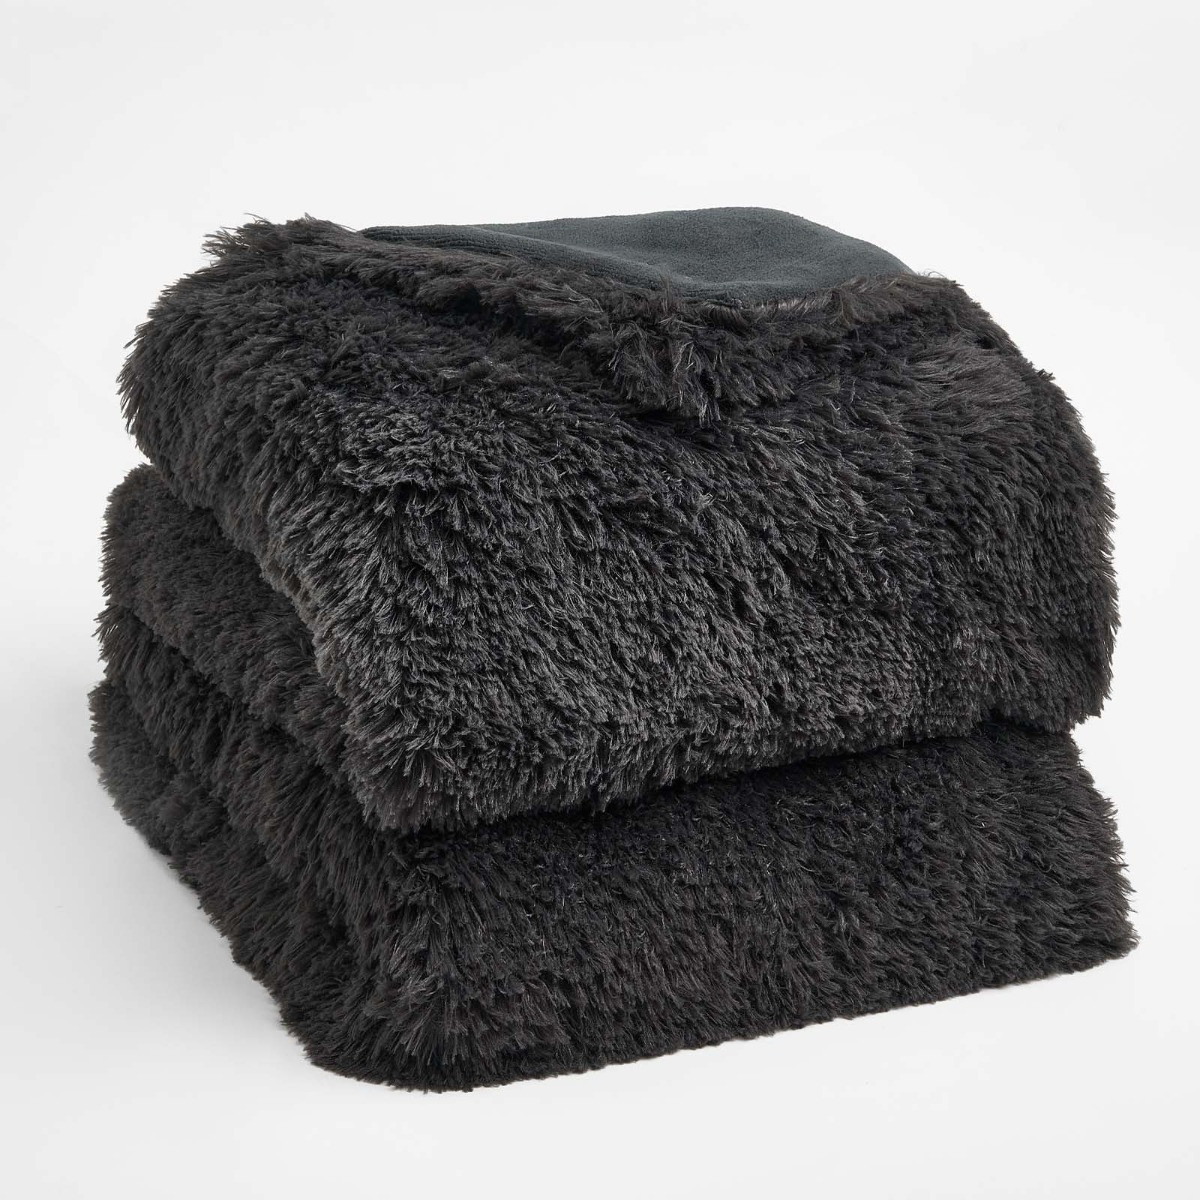 Sienna by OHS Fluffy Throw Blanket, Charcoal - 60 x 80 inches>